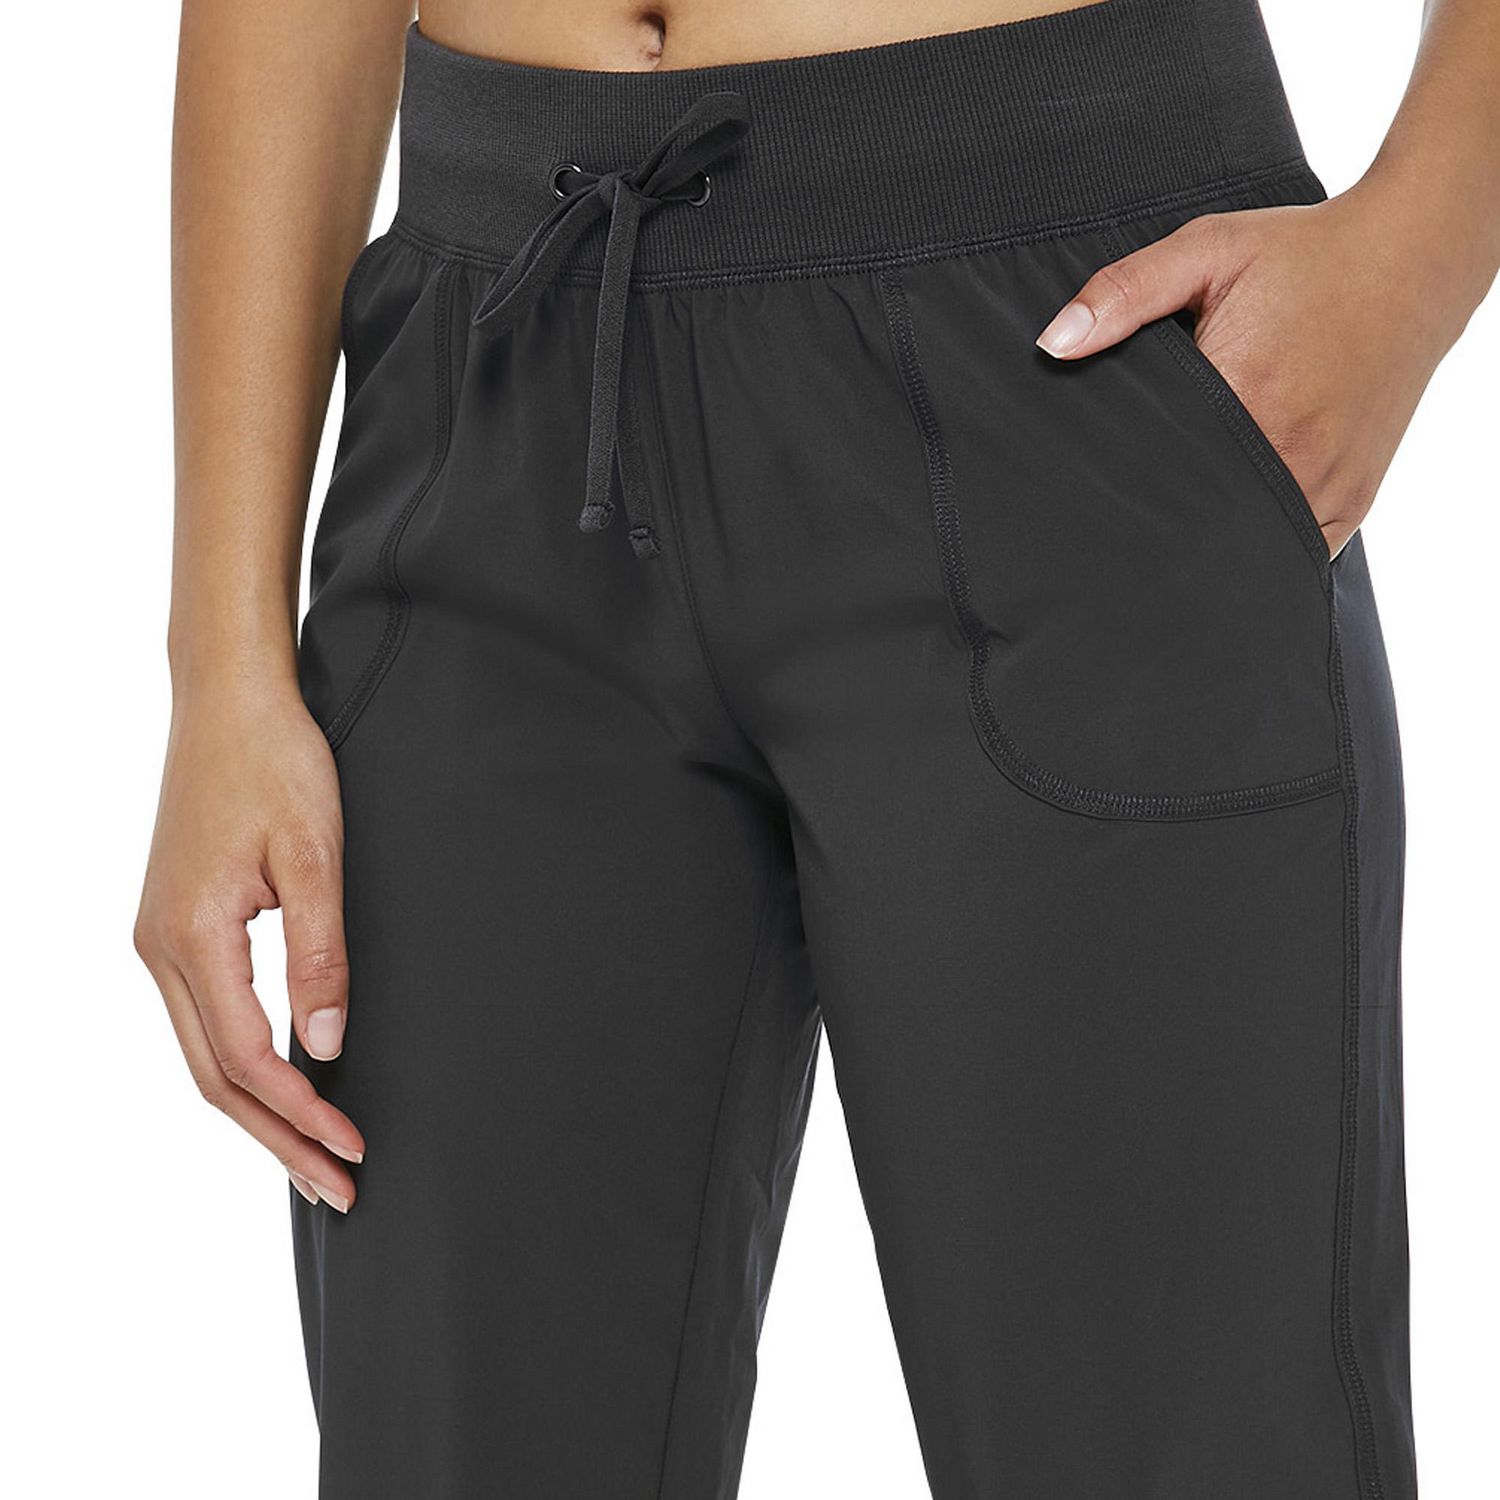 Athletic Work Women's Black Body/Cuerpo Waistband/Cuff Athletic Pants Size  14W